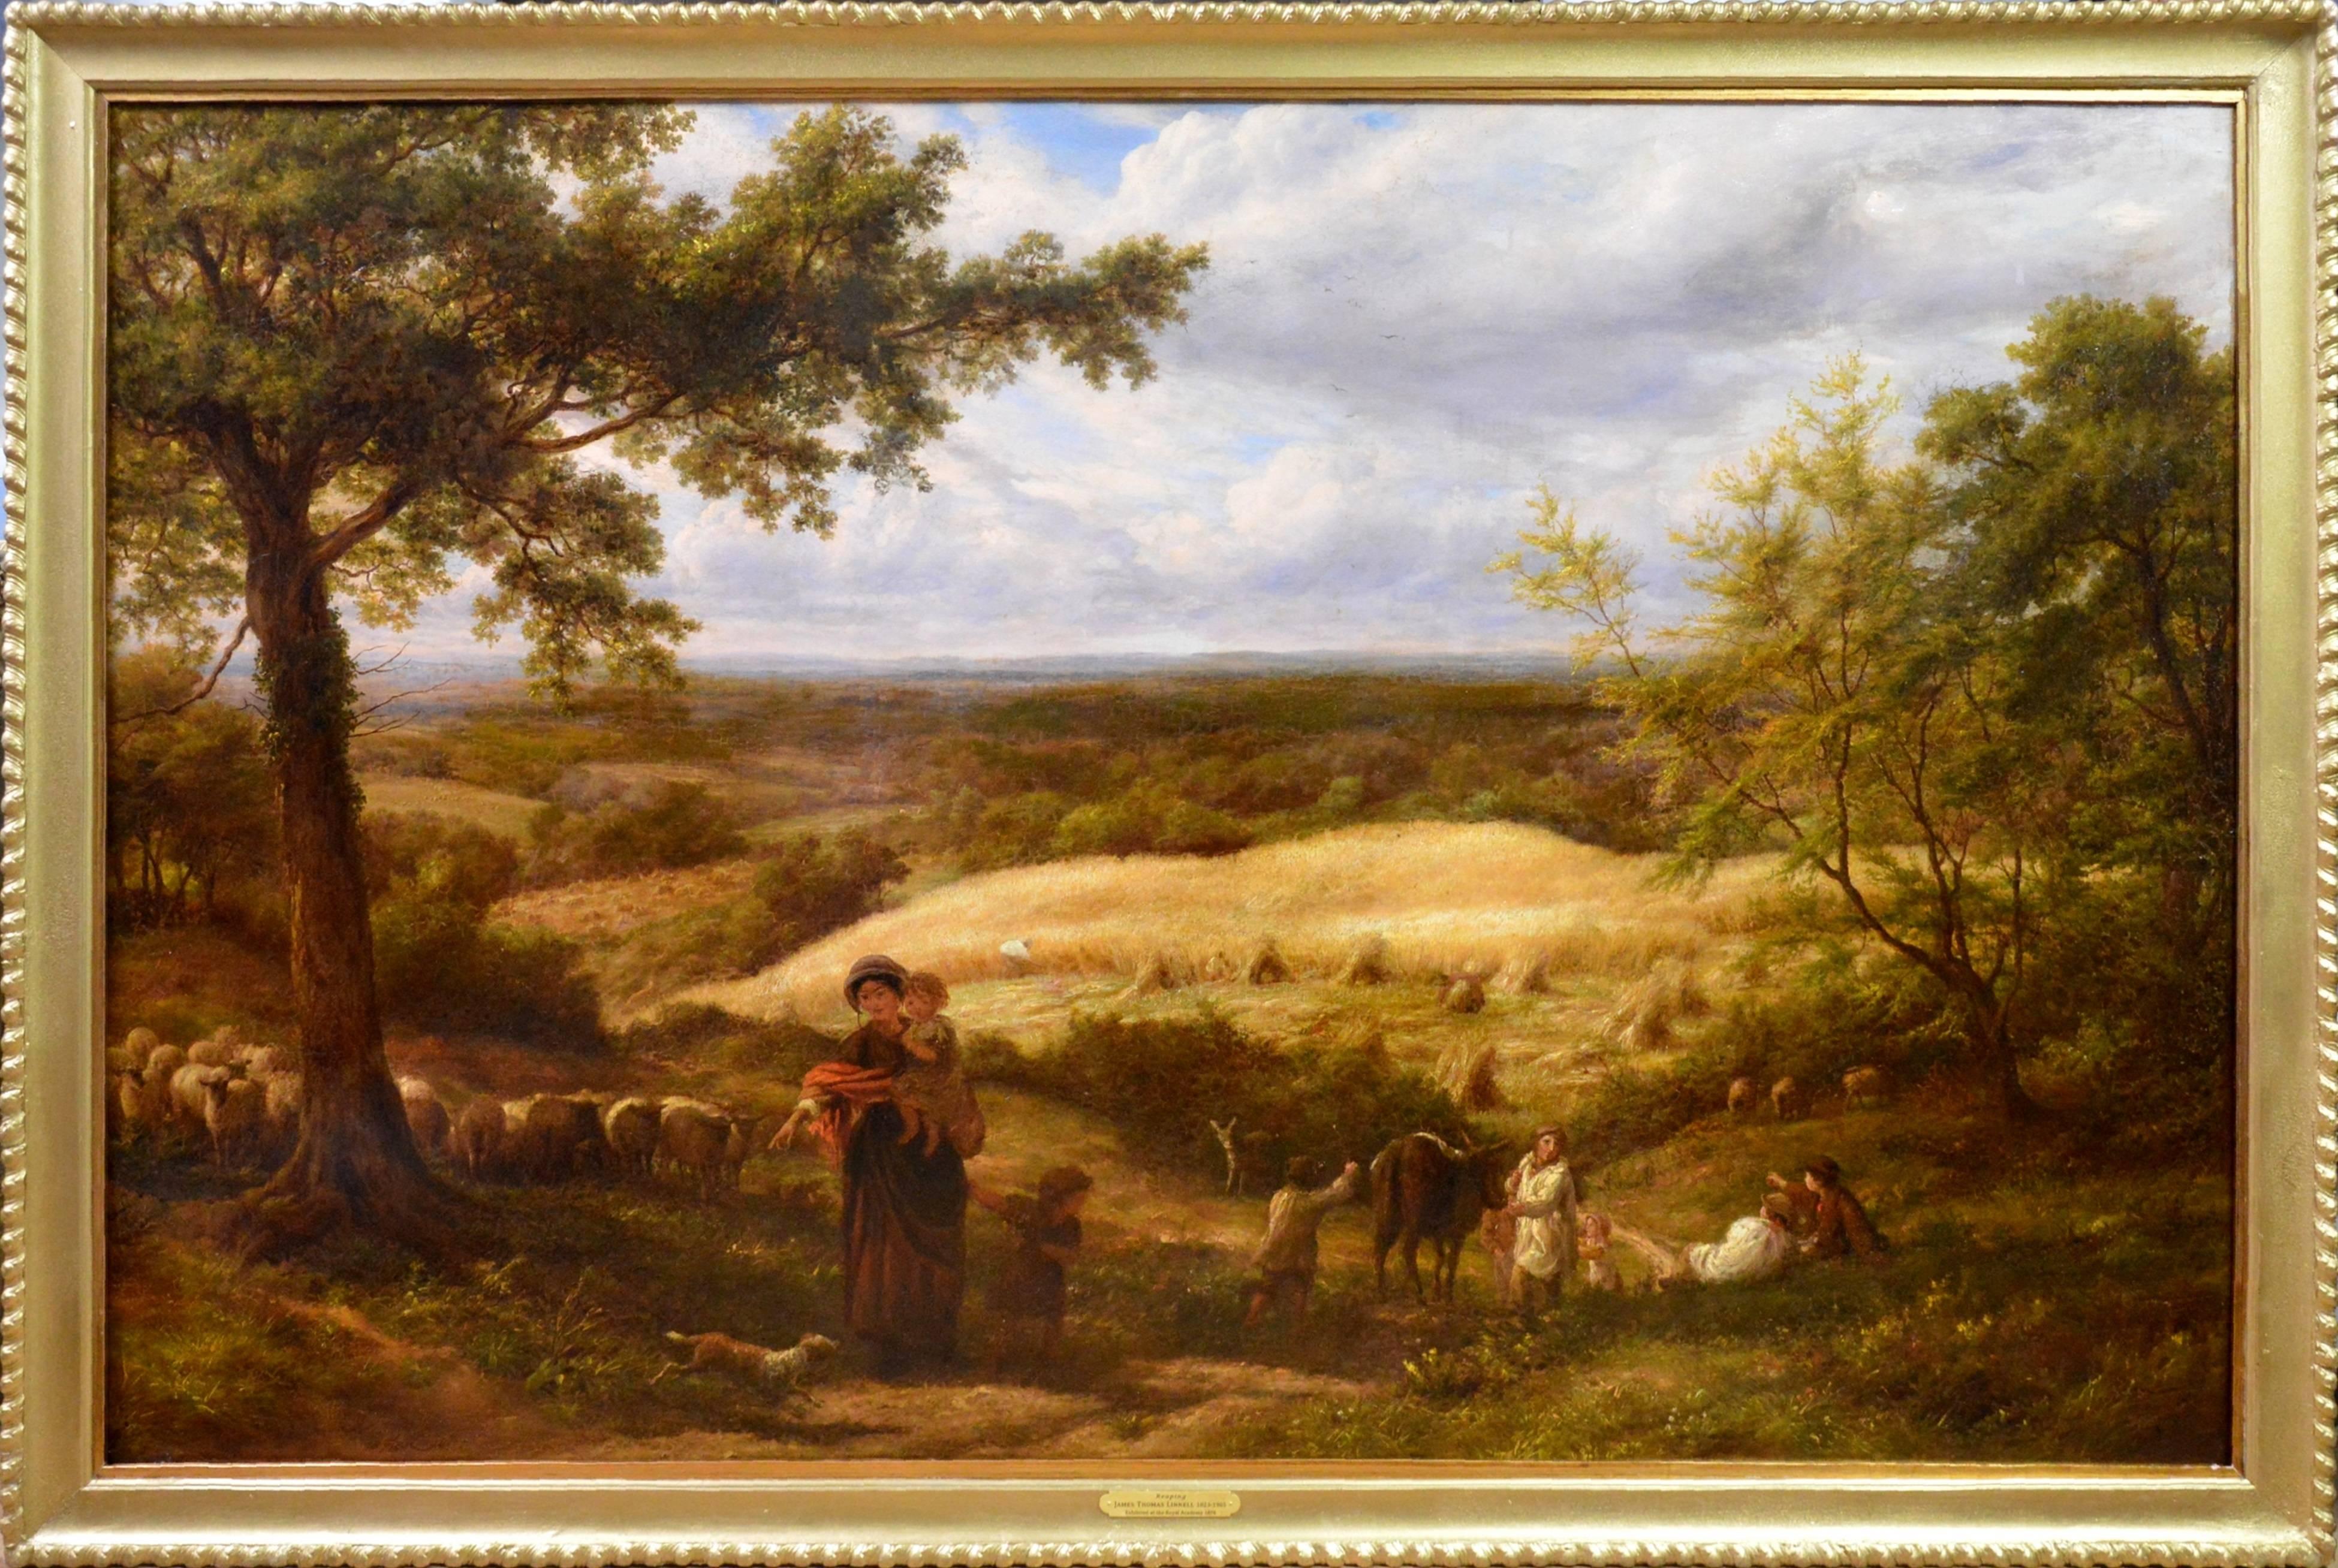 James Thomas Linnell Landscape Painting - Reaping - Very Large 19th Century Oil Painting - Royal Academy 1870 - Linnell